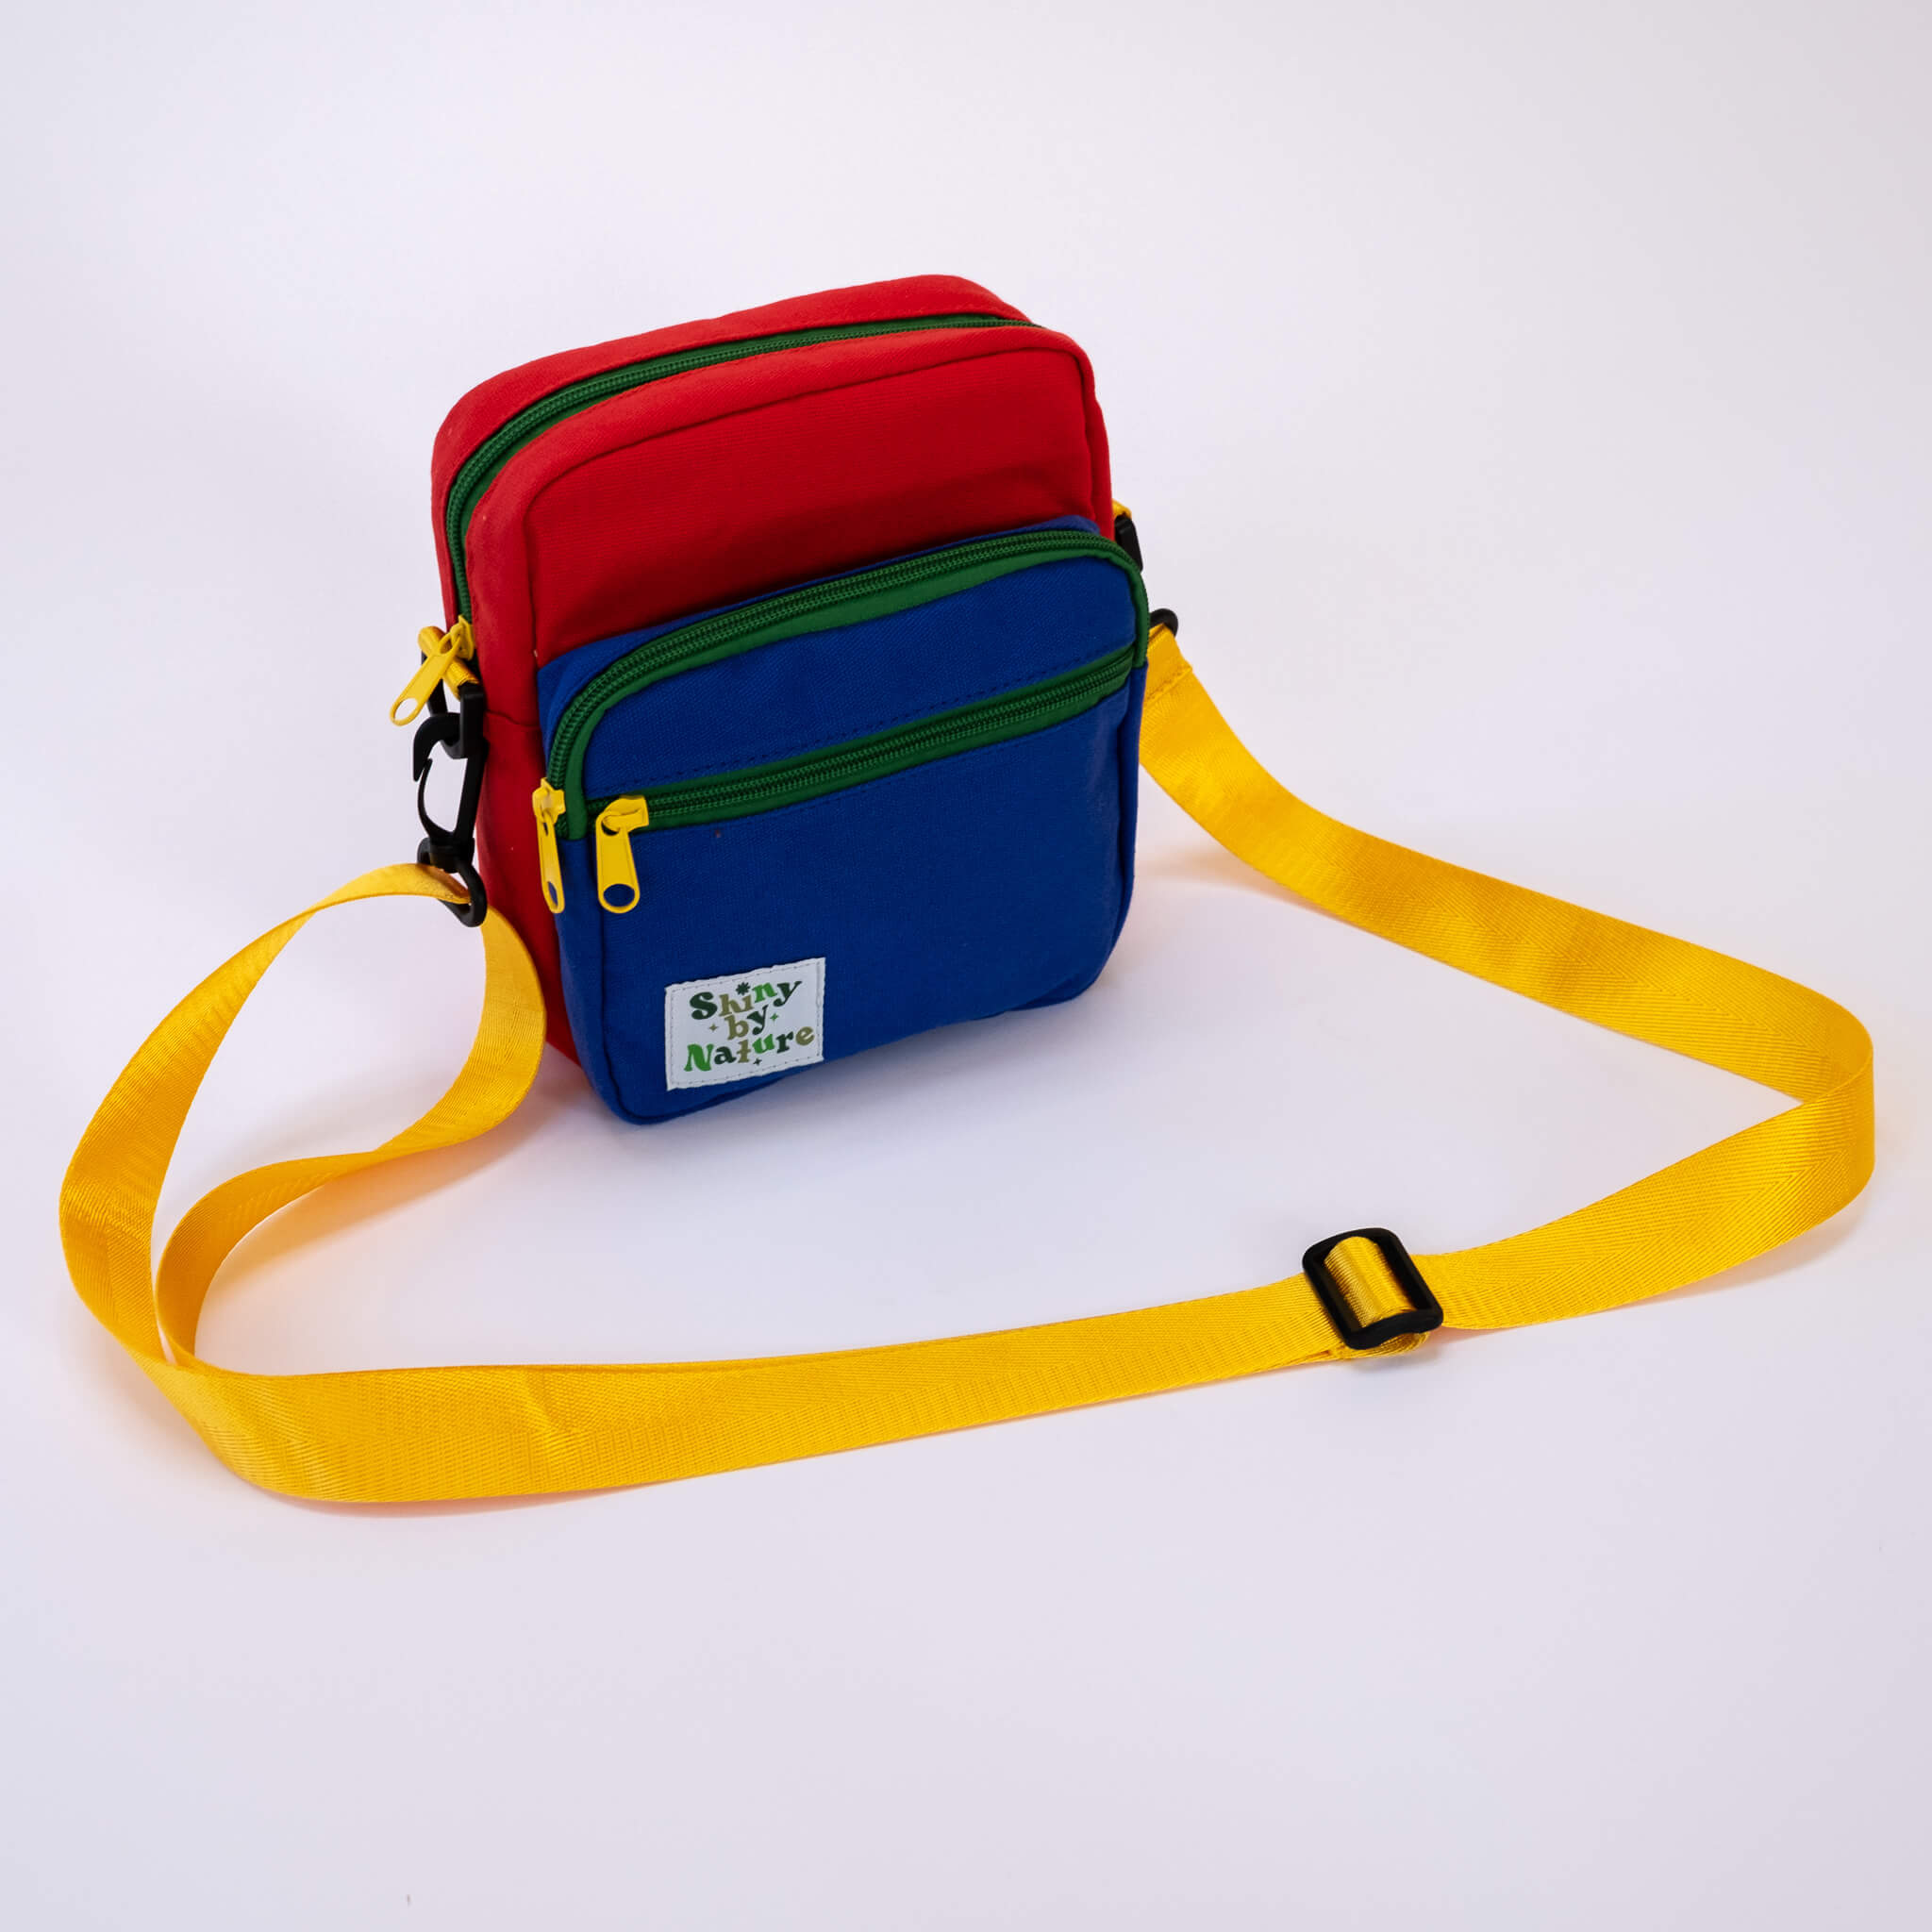 bff crossbody bag 2.0 primary colors